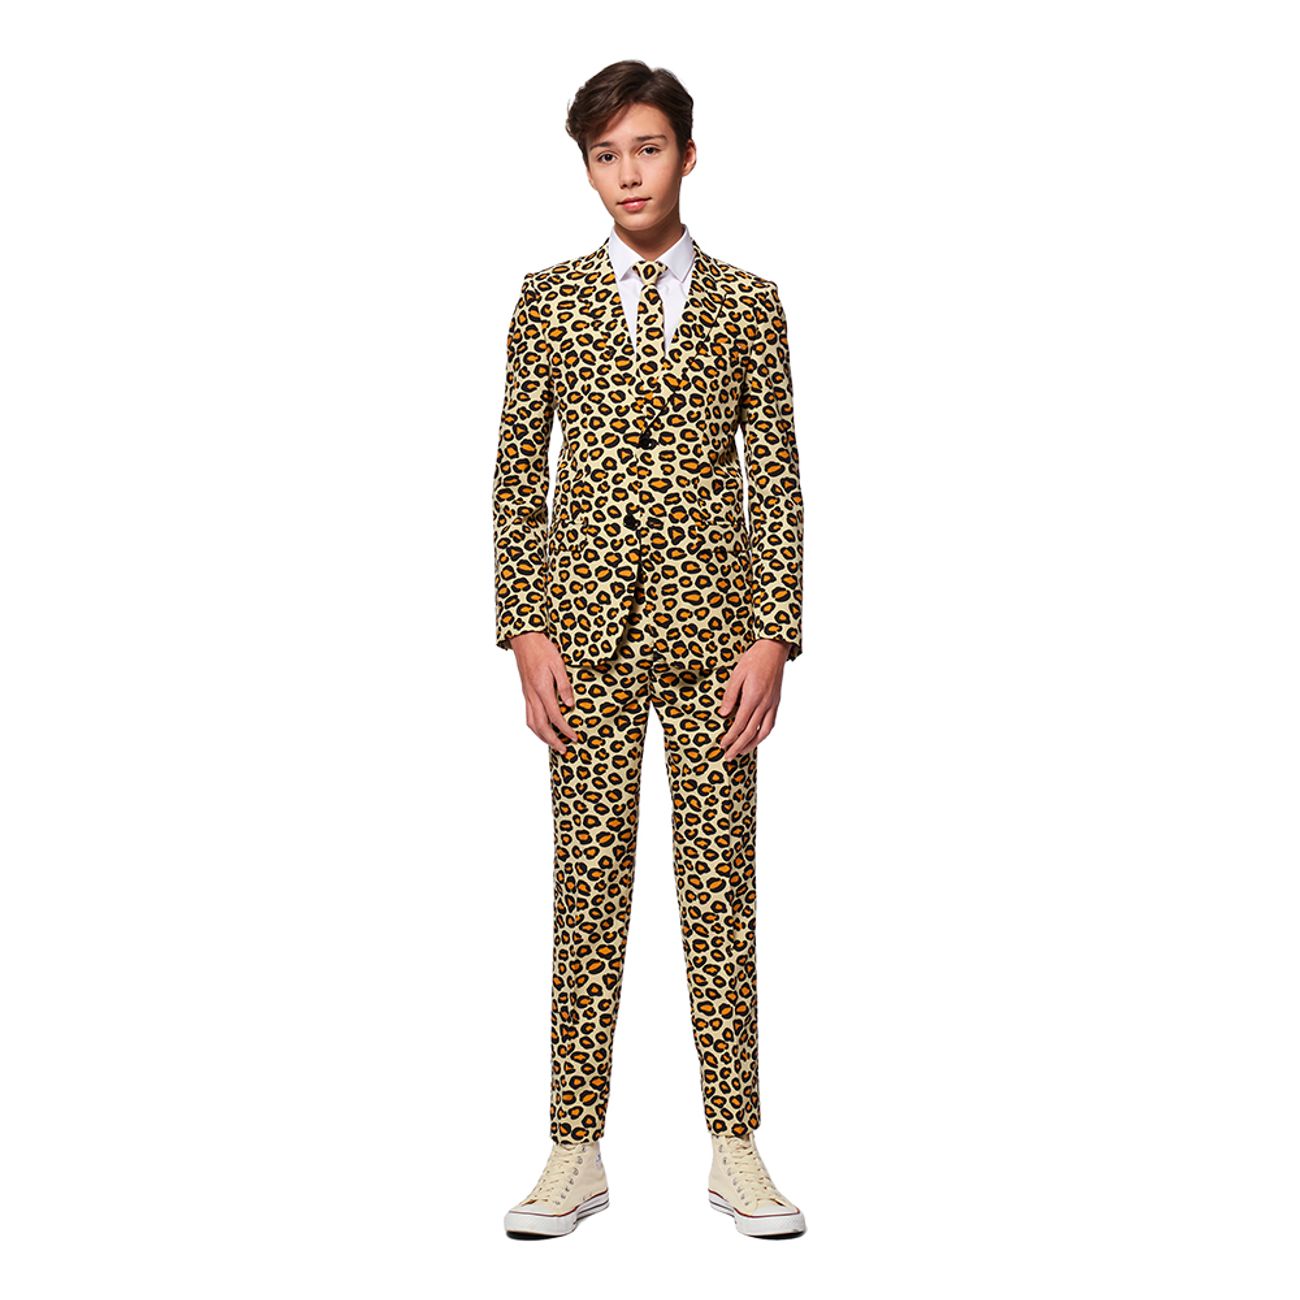 opposuits-teen-the-jag-kostym-75469-1